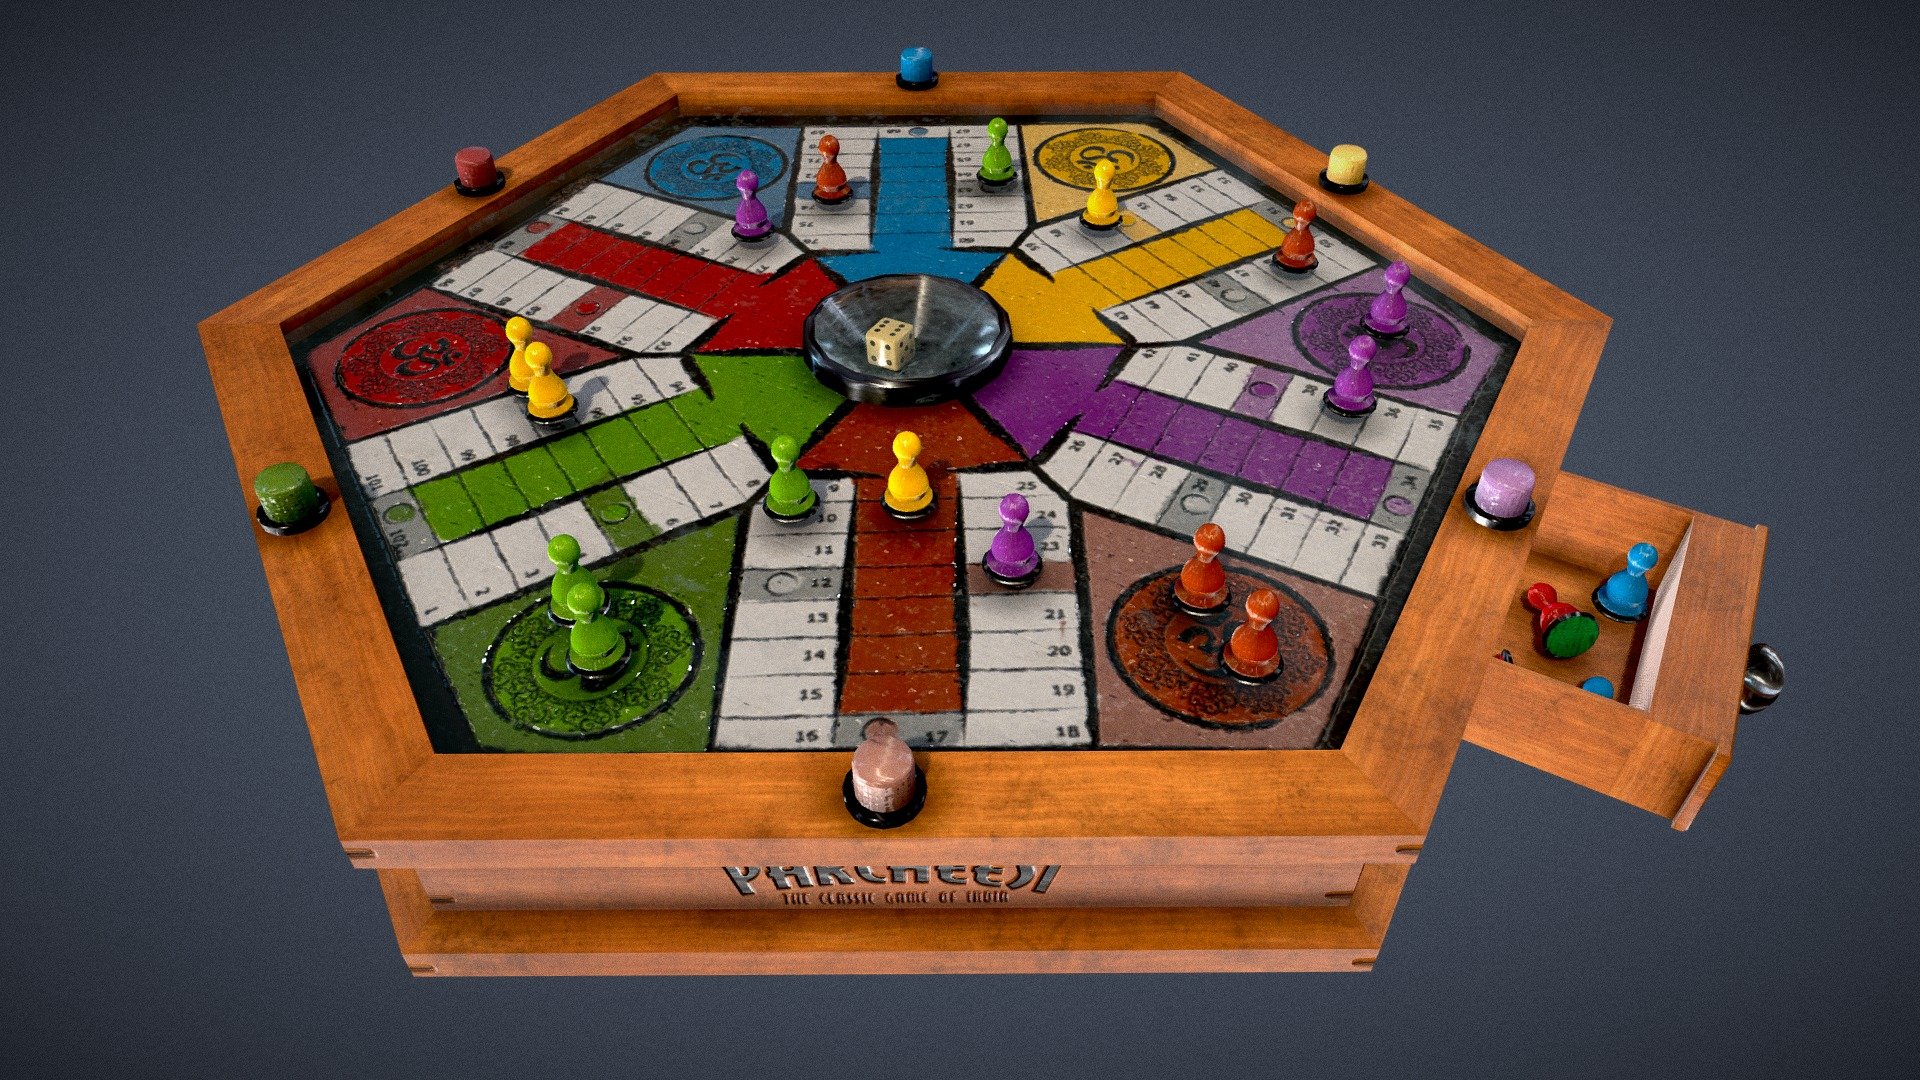 Indian Parcheesi Made in 3Ds Max, Substance Painter, Photoshop &amp; Illustrator. 
Thanks for Watching!! - Indian Parcheesi - 3D model by Korax254 (@Tonifo254) 3d model